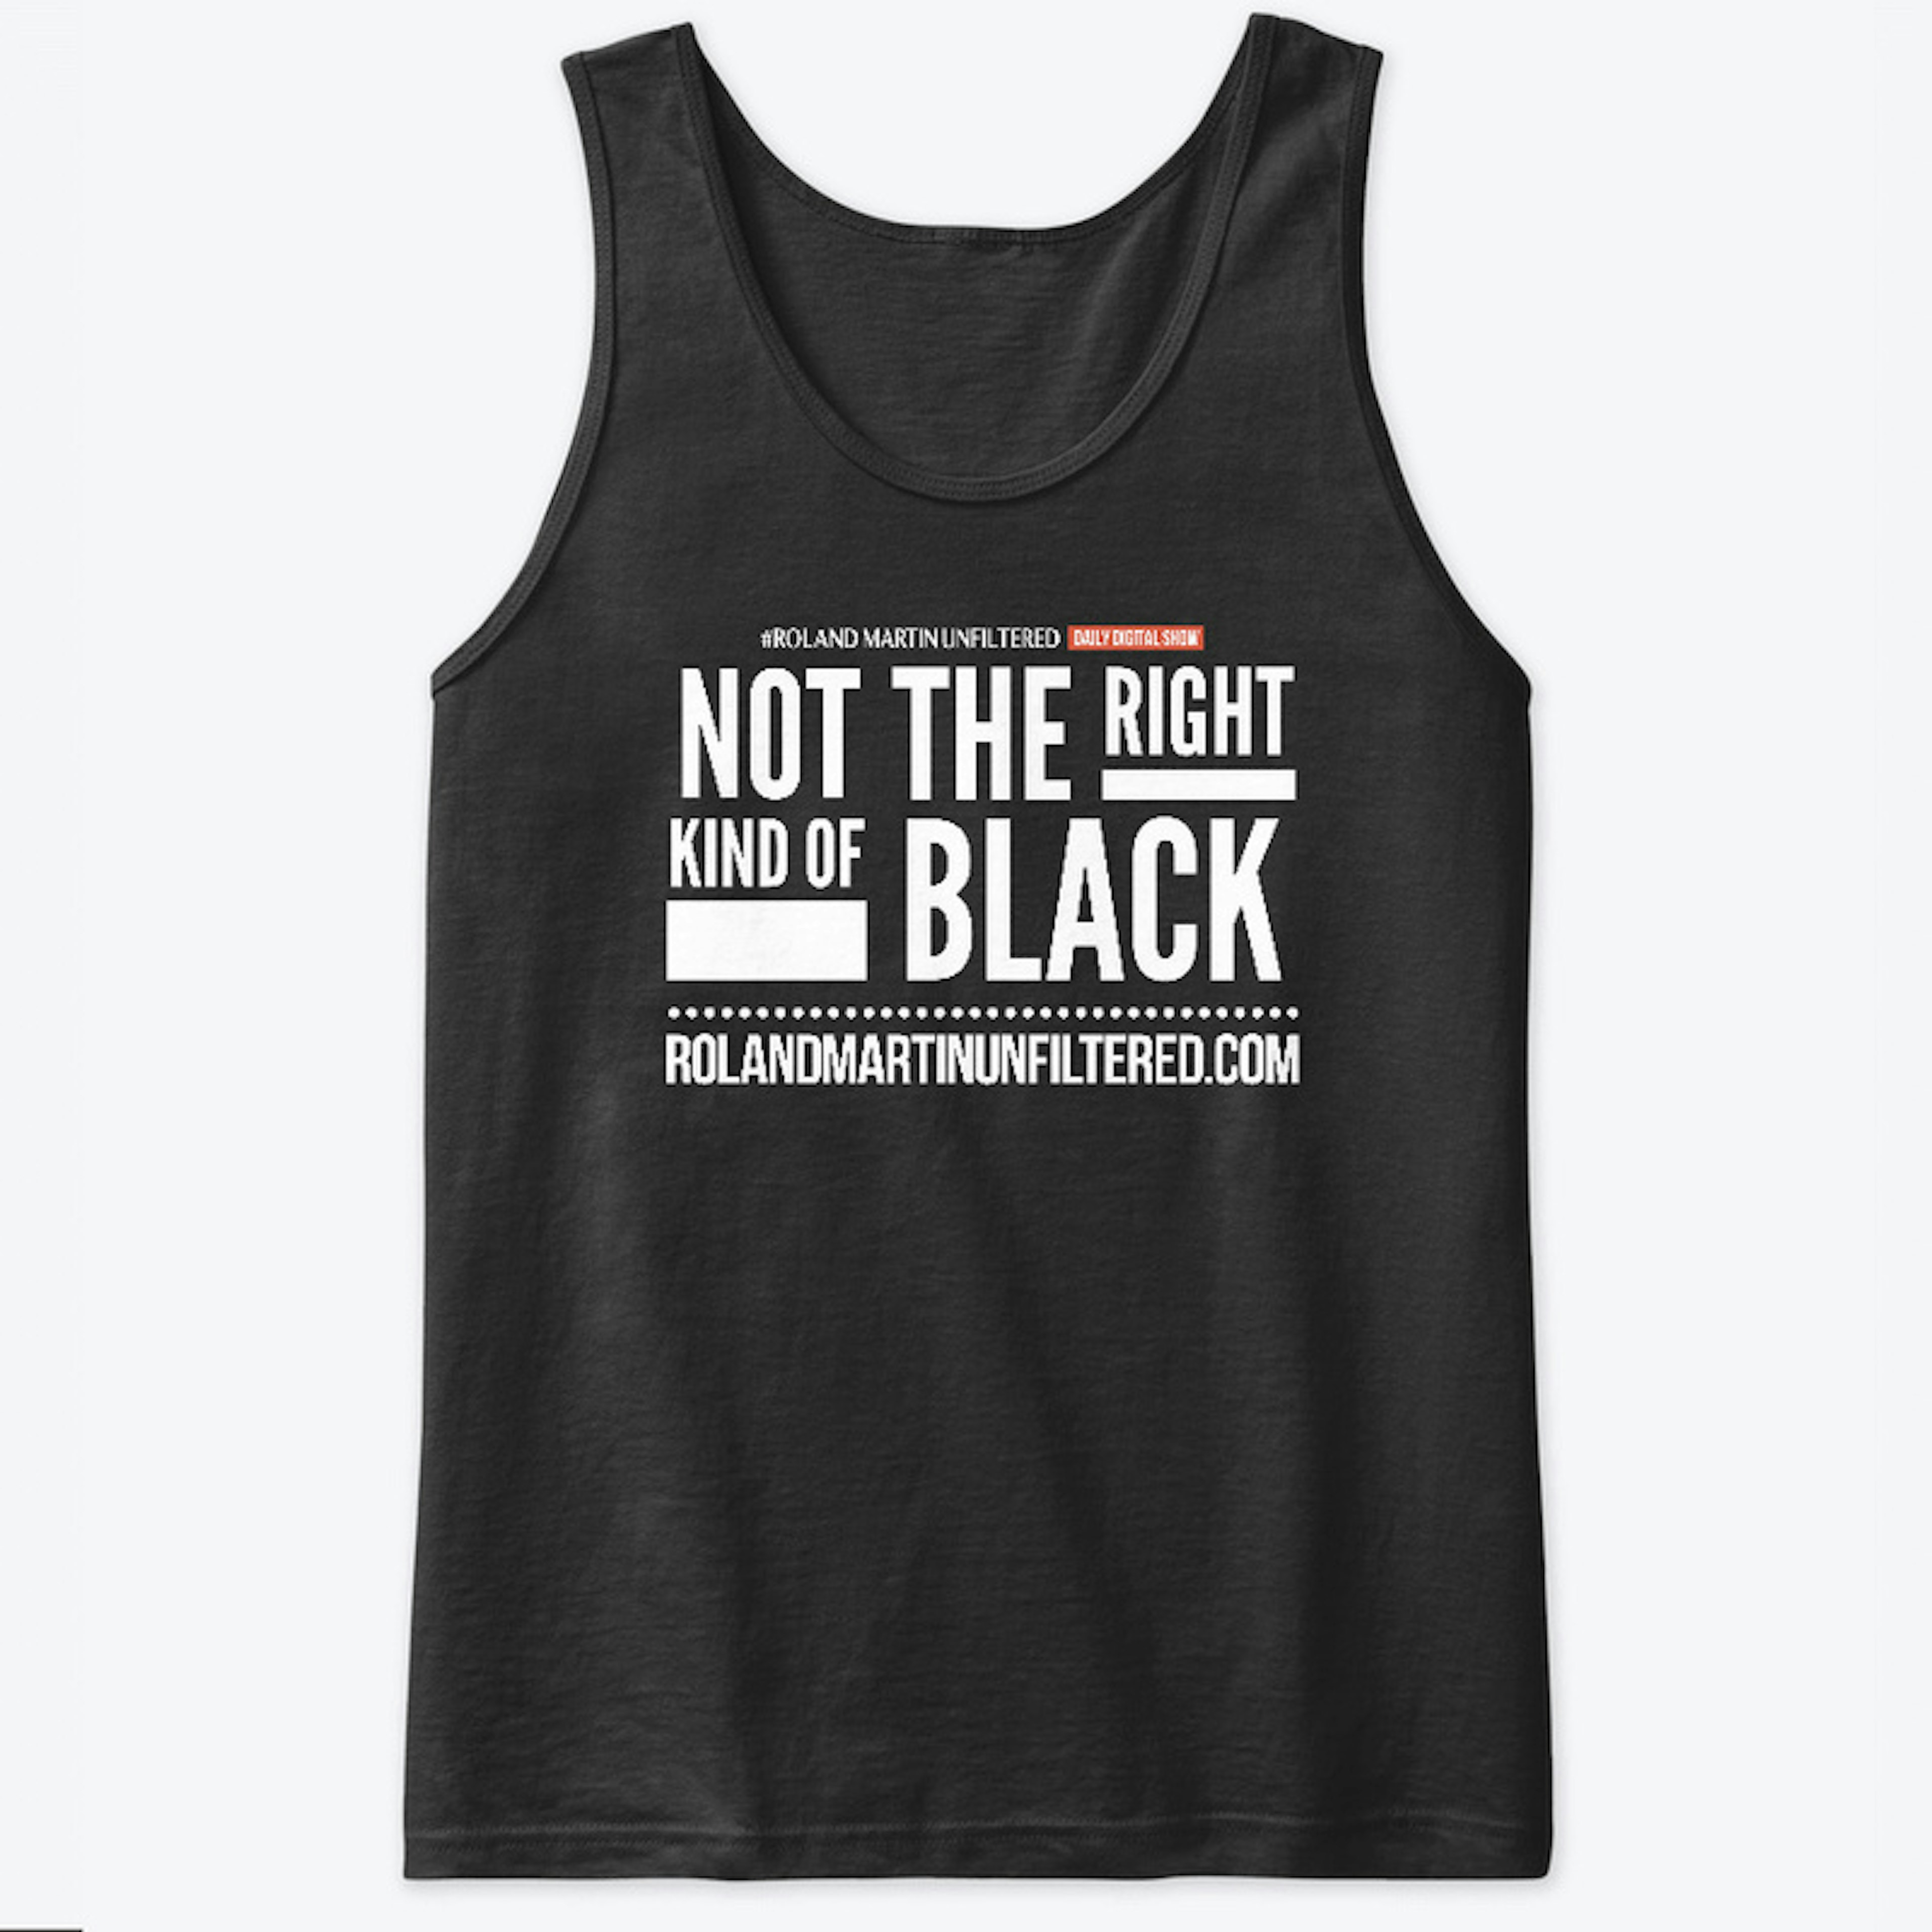 #RMU: Not The Right Kind Of Black 2.0